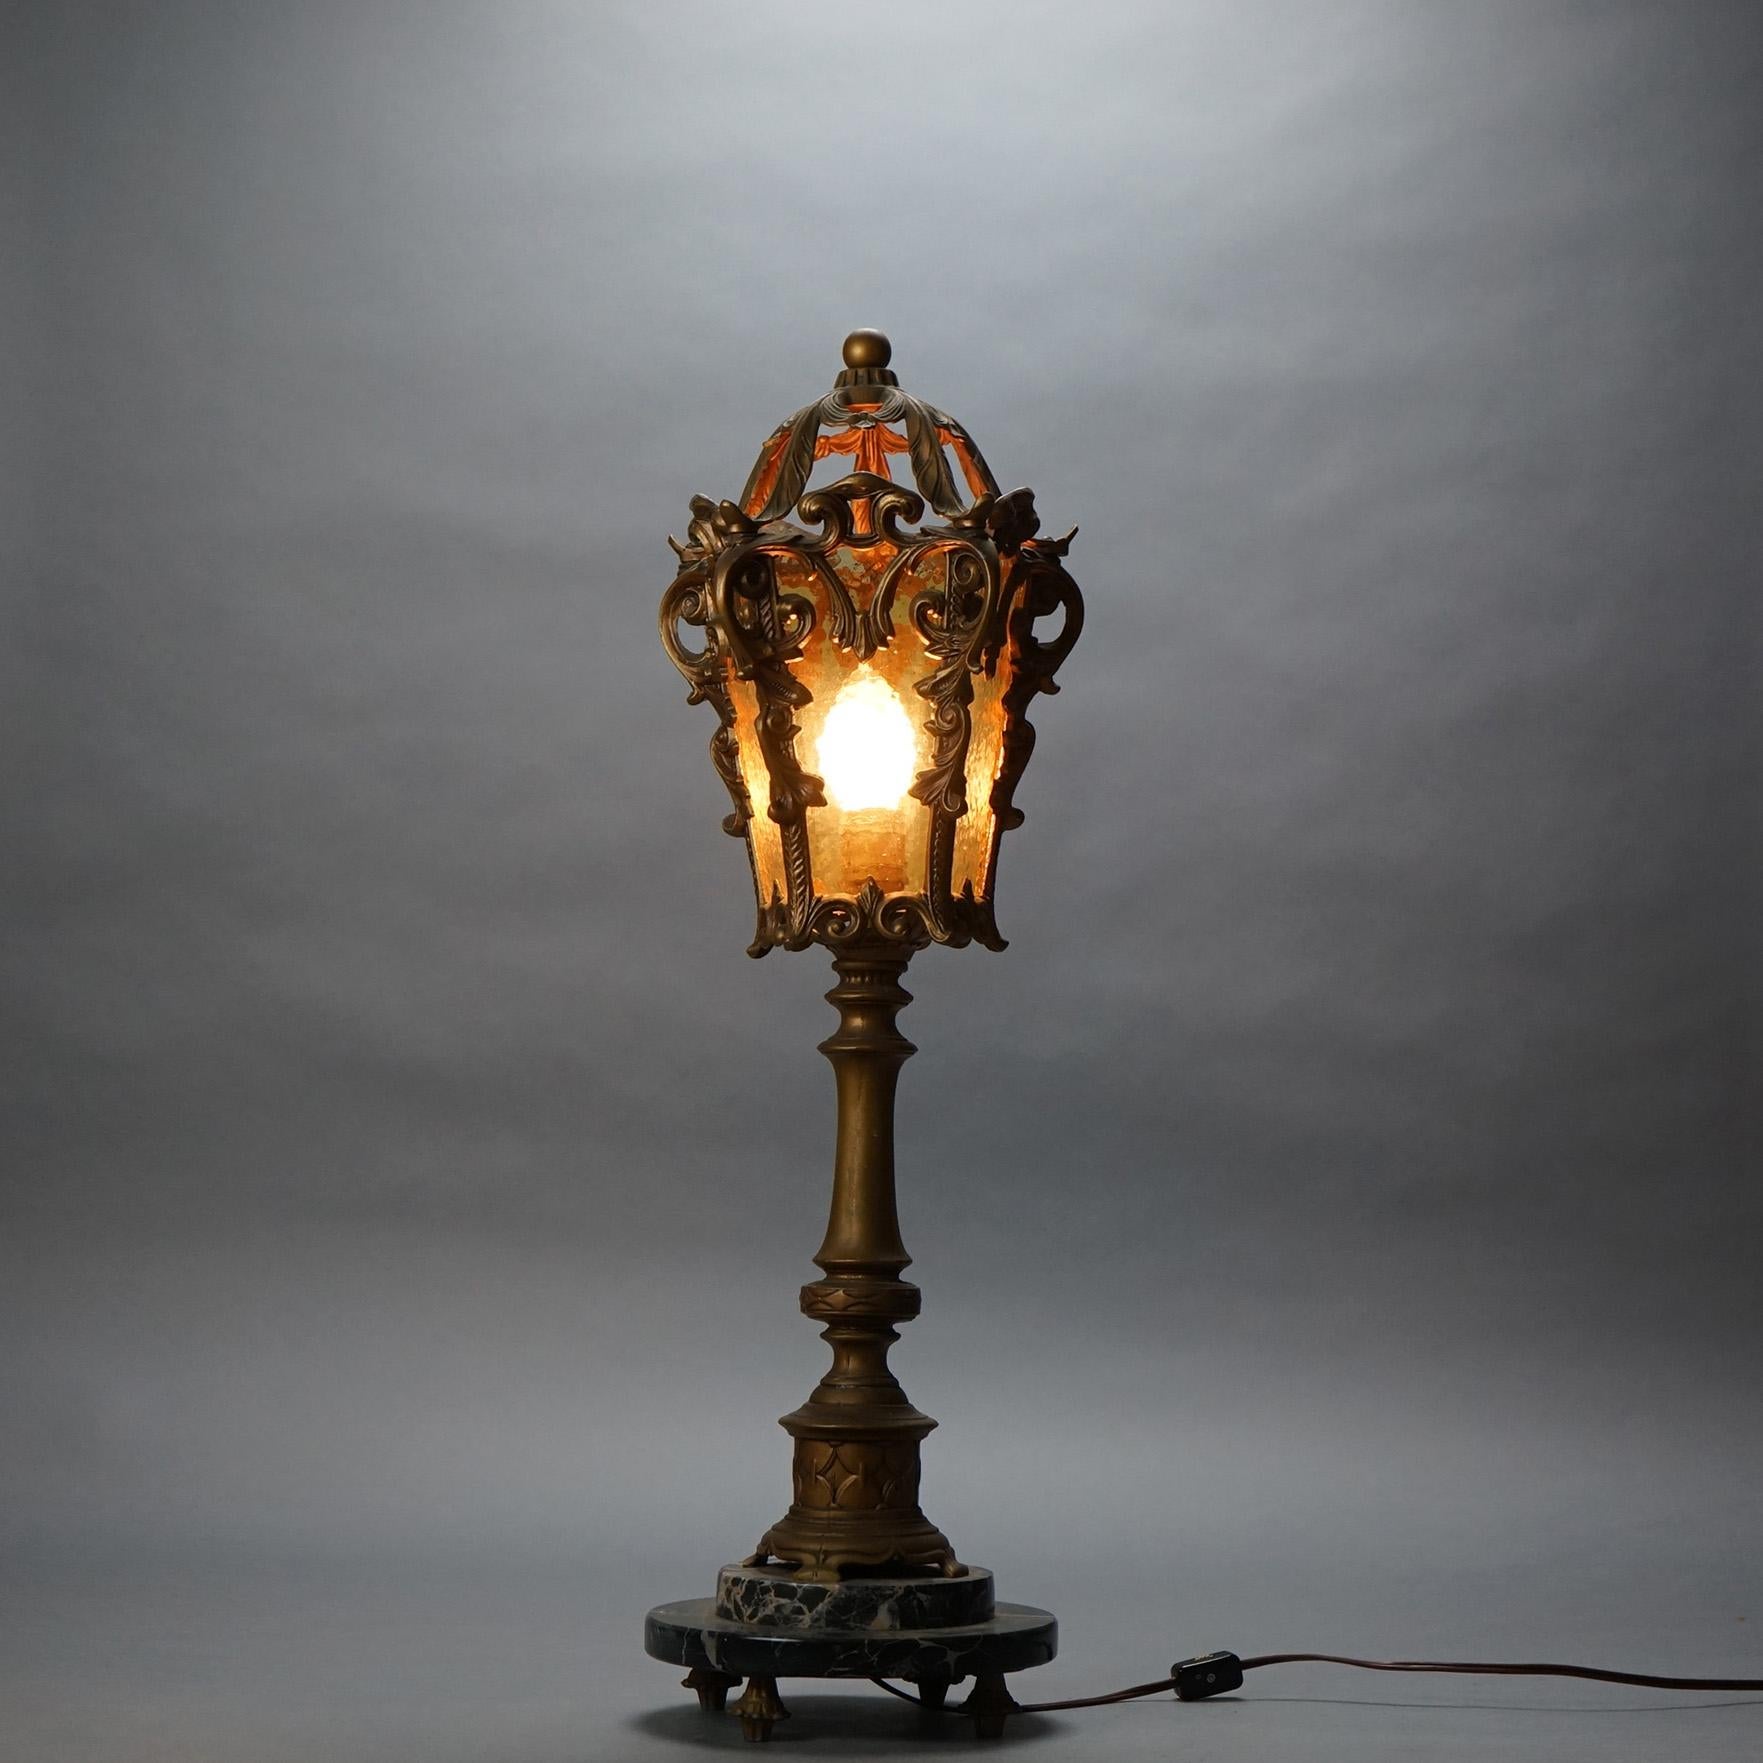 Antique Arts & Crafts Hammered Amber Glass Torchiere Table Lamp c1920 For Sale 4